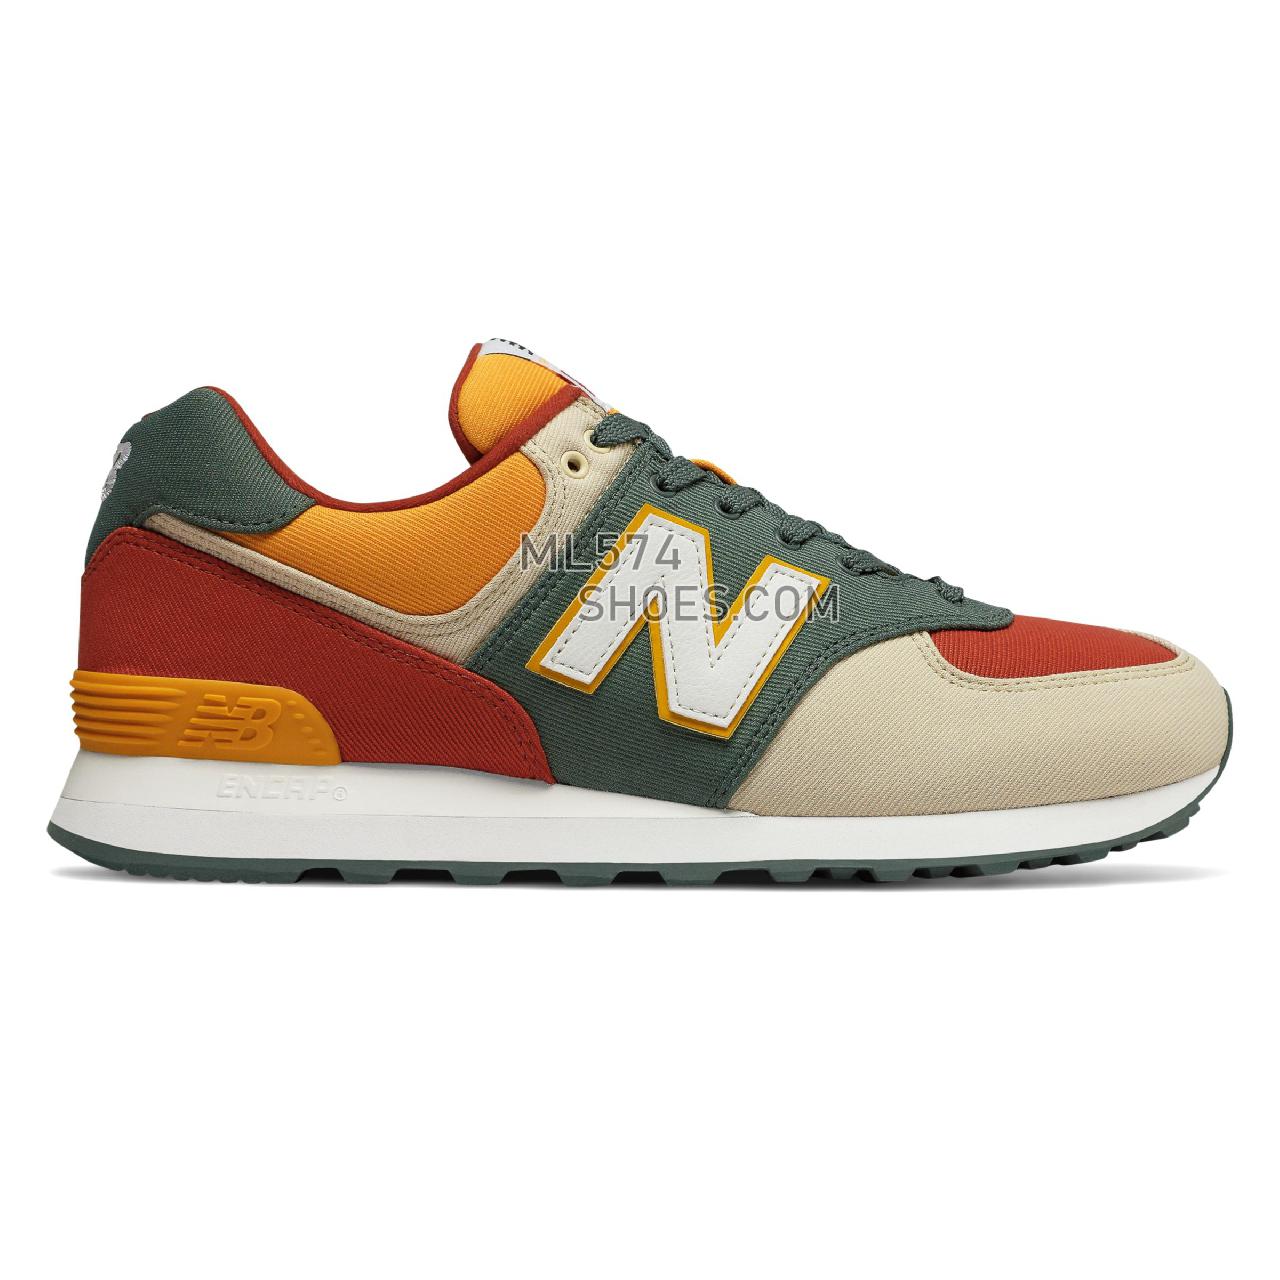 New Balance 574 - Men's 574 - Classic Faded Rosin with Vintage Russet - ML574IND